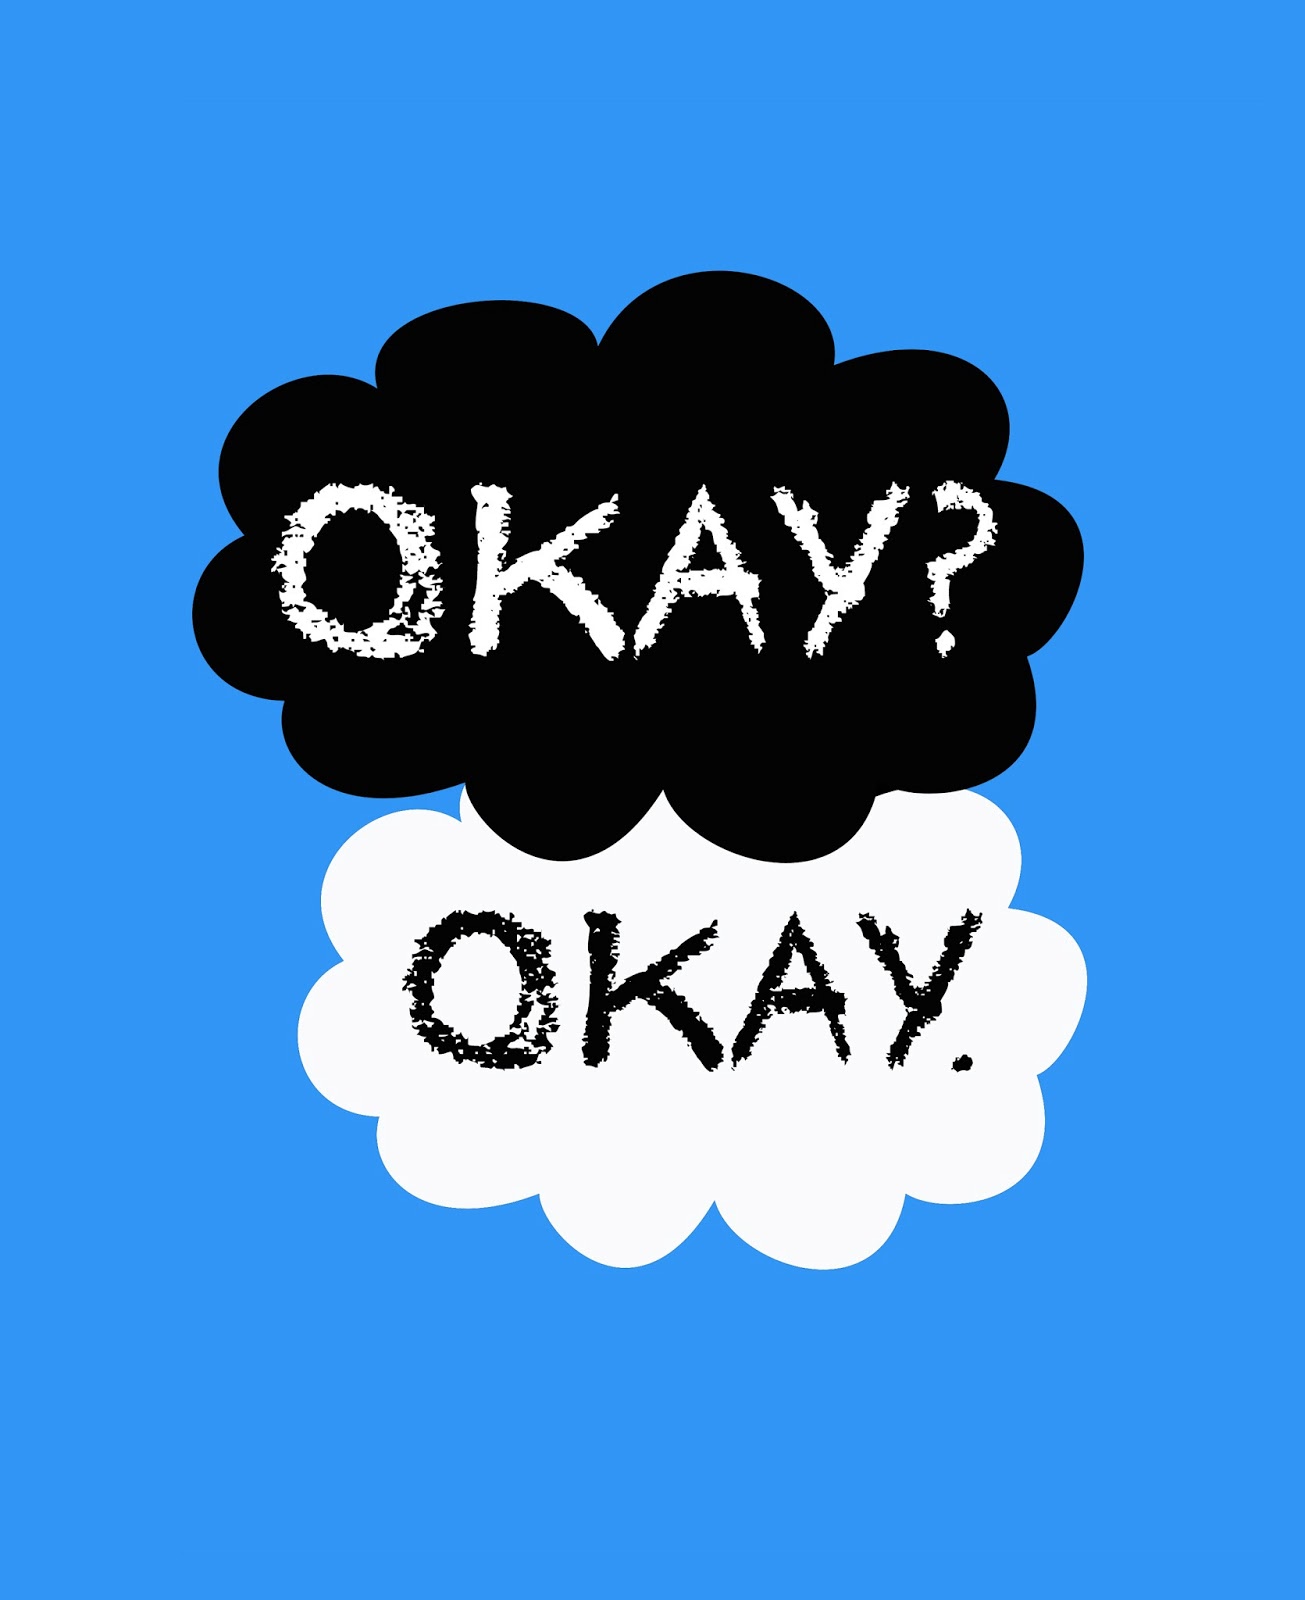 The Art of Fandom Shirts: Maybe Okay will be Our Always